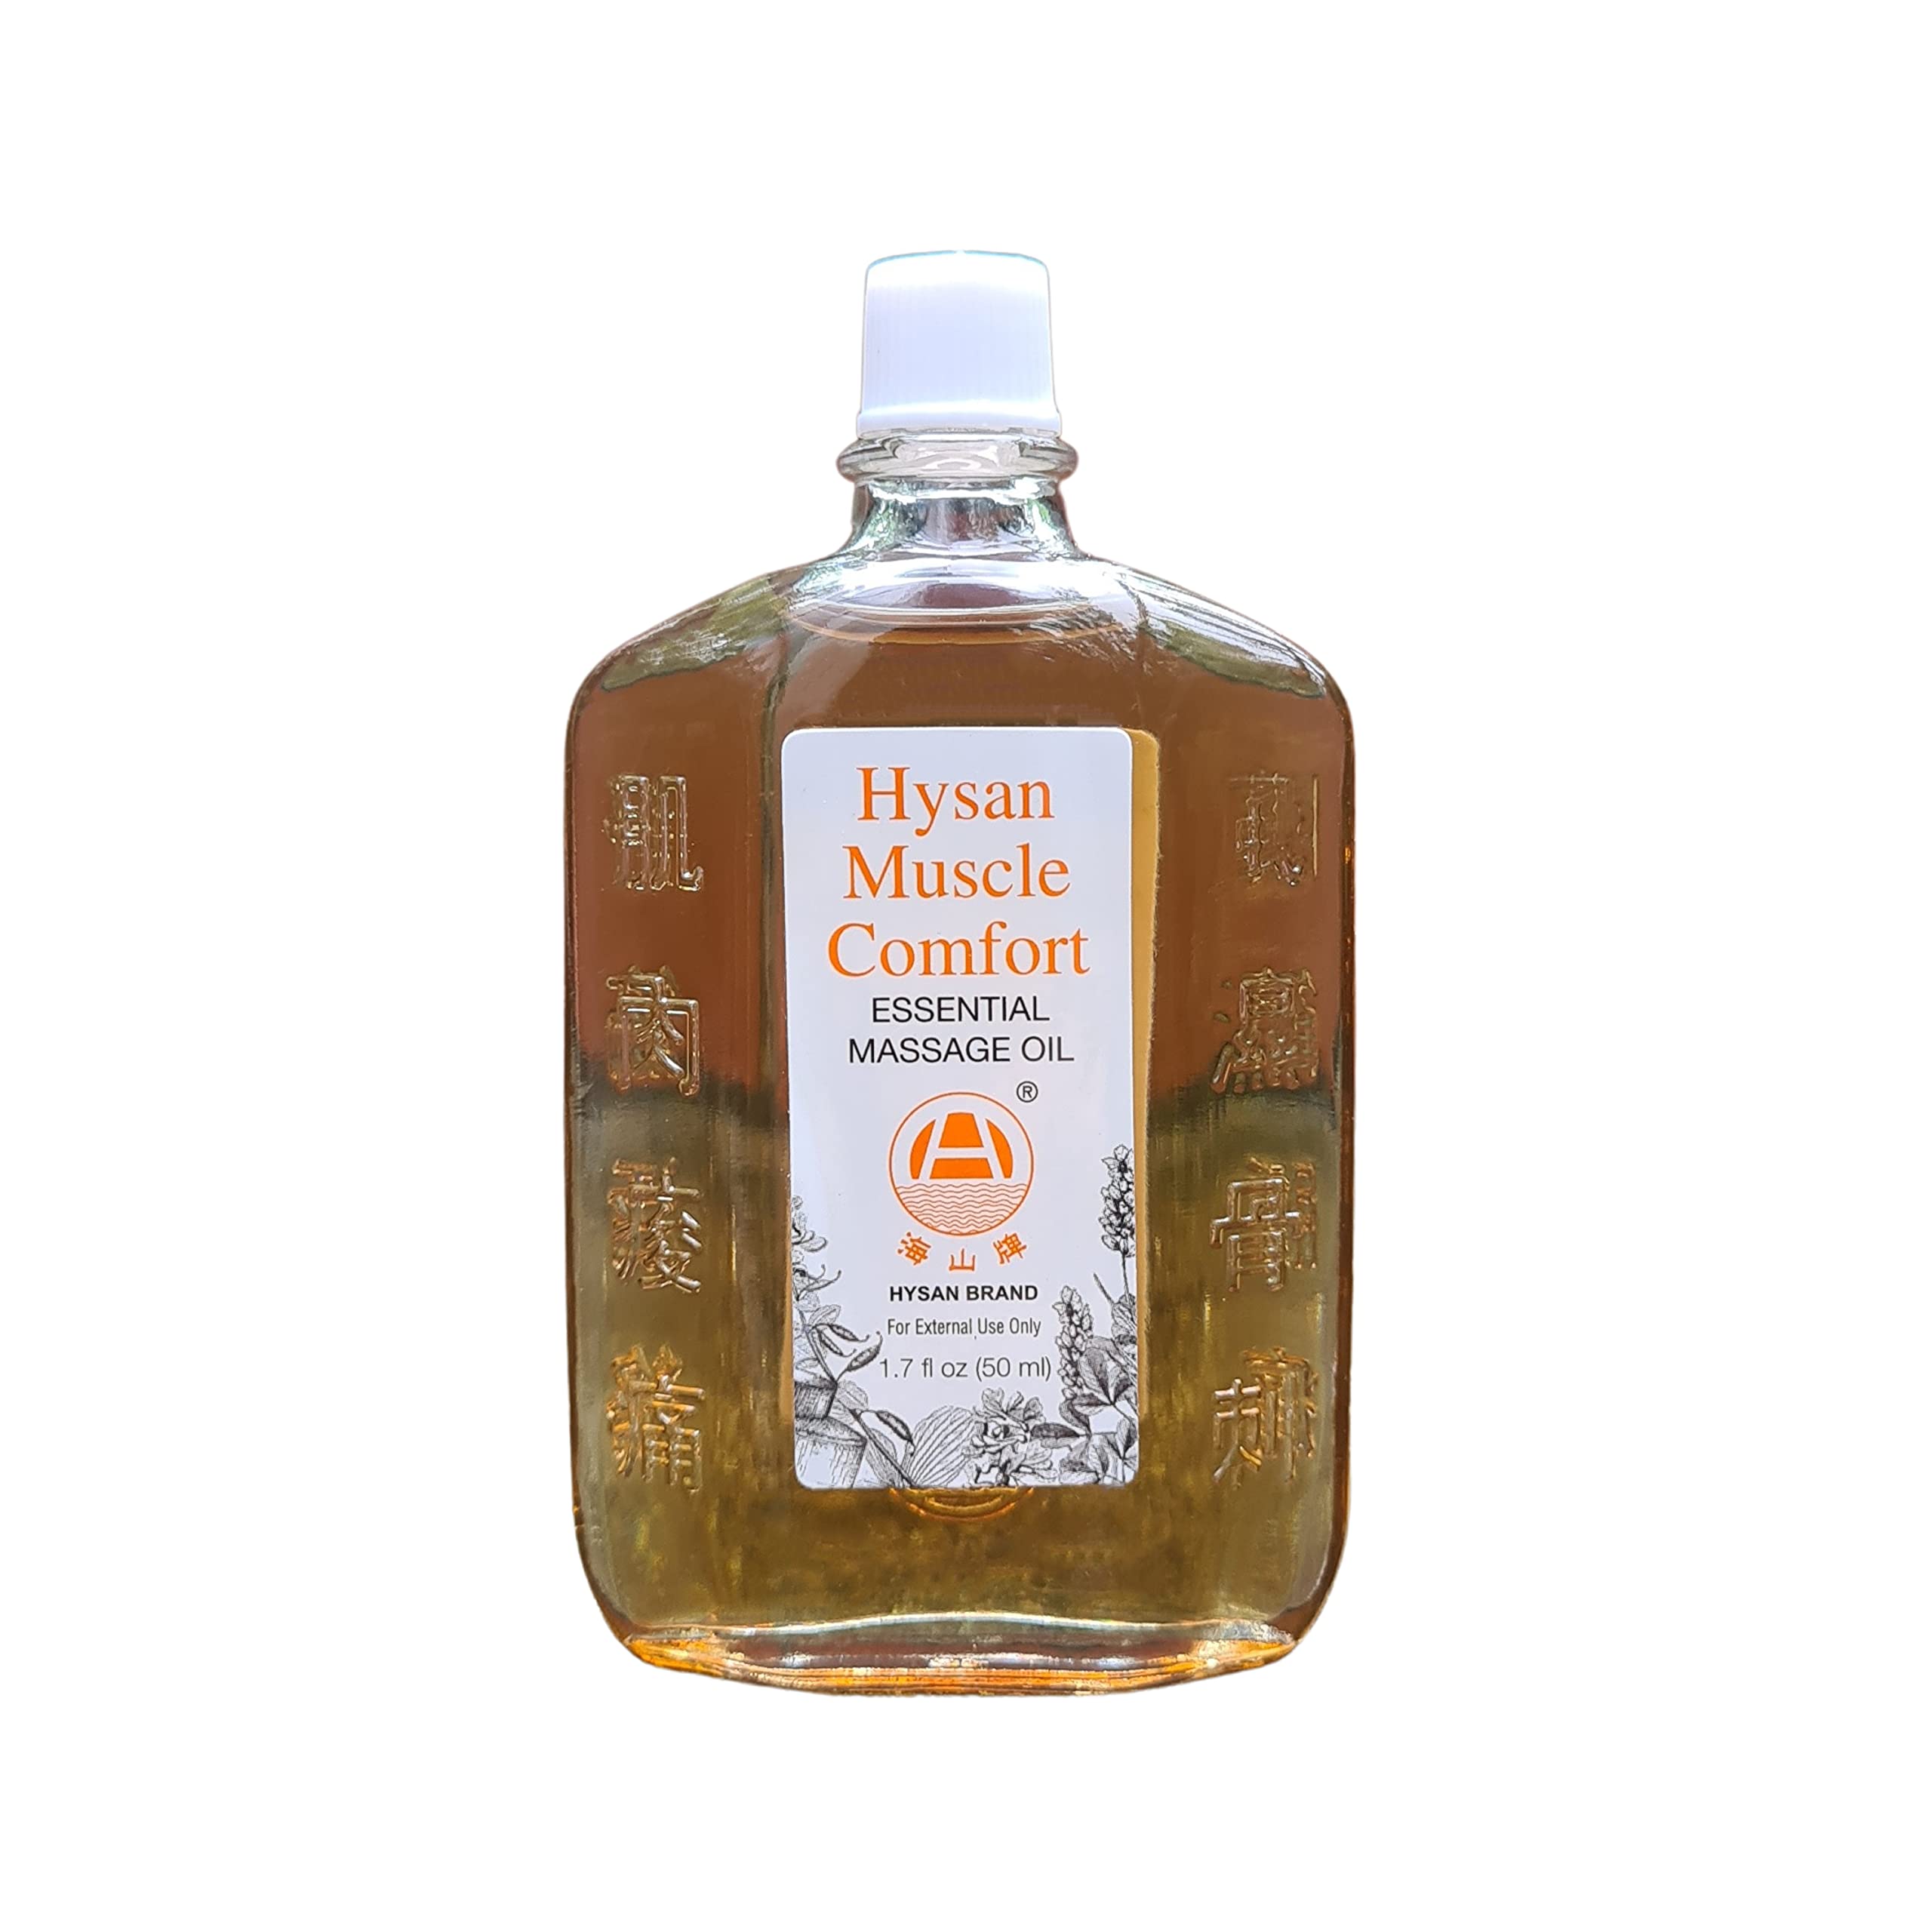 Hysan Muscle Comfort Essential Massage Oil, 100% Licensed Natural Massage Oil Herbal Ingredients: Trusted & Approved Formula, Sore Muscles, Aches, Pains & Tissue Repair - 50ml